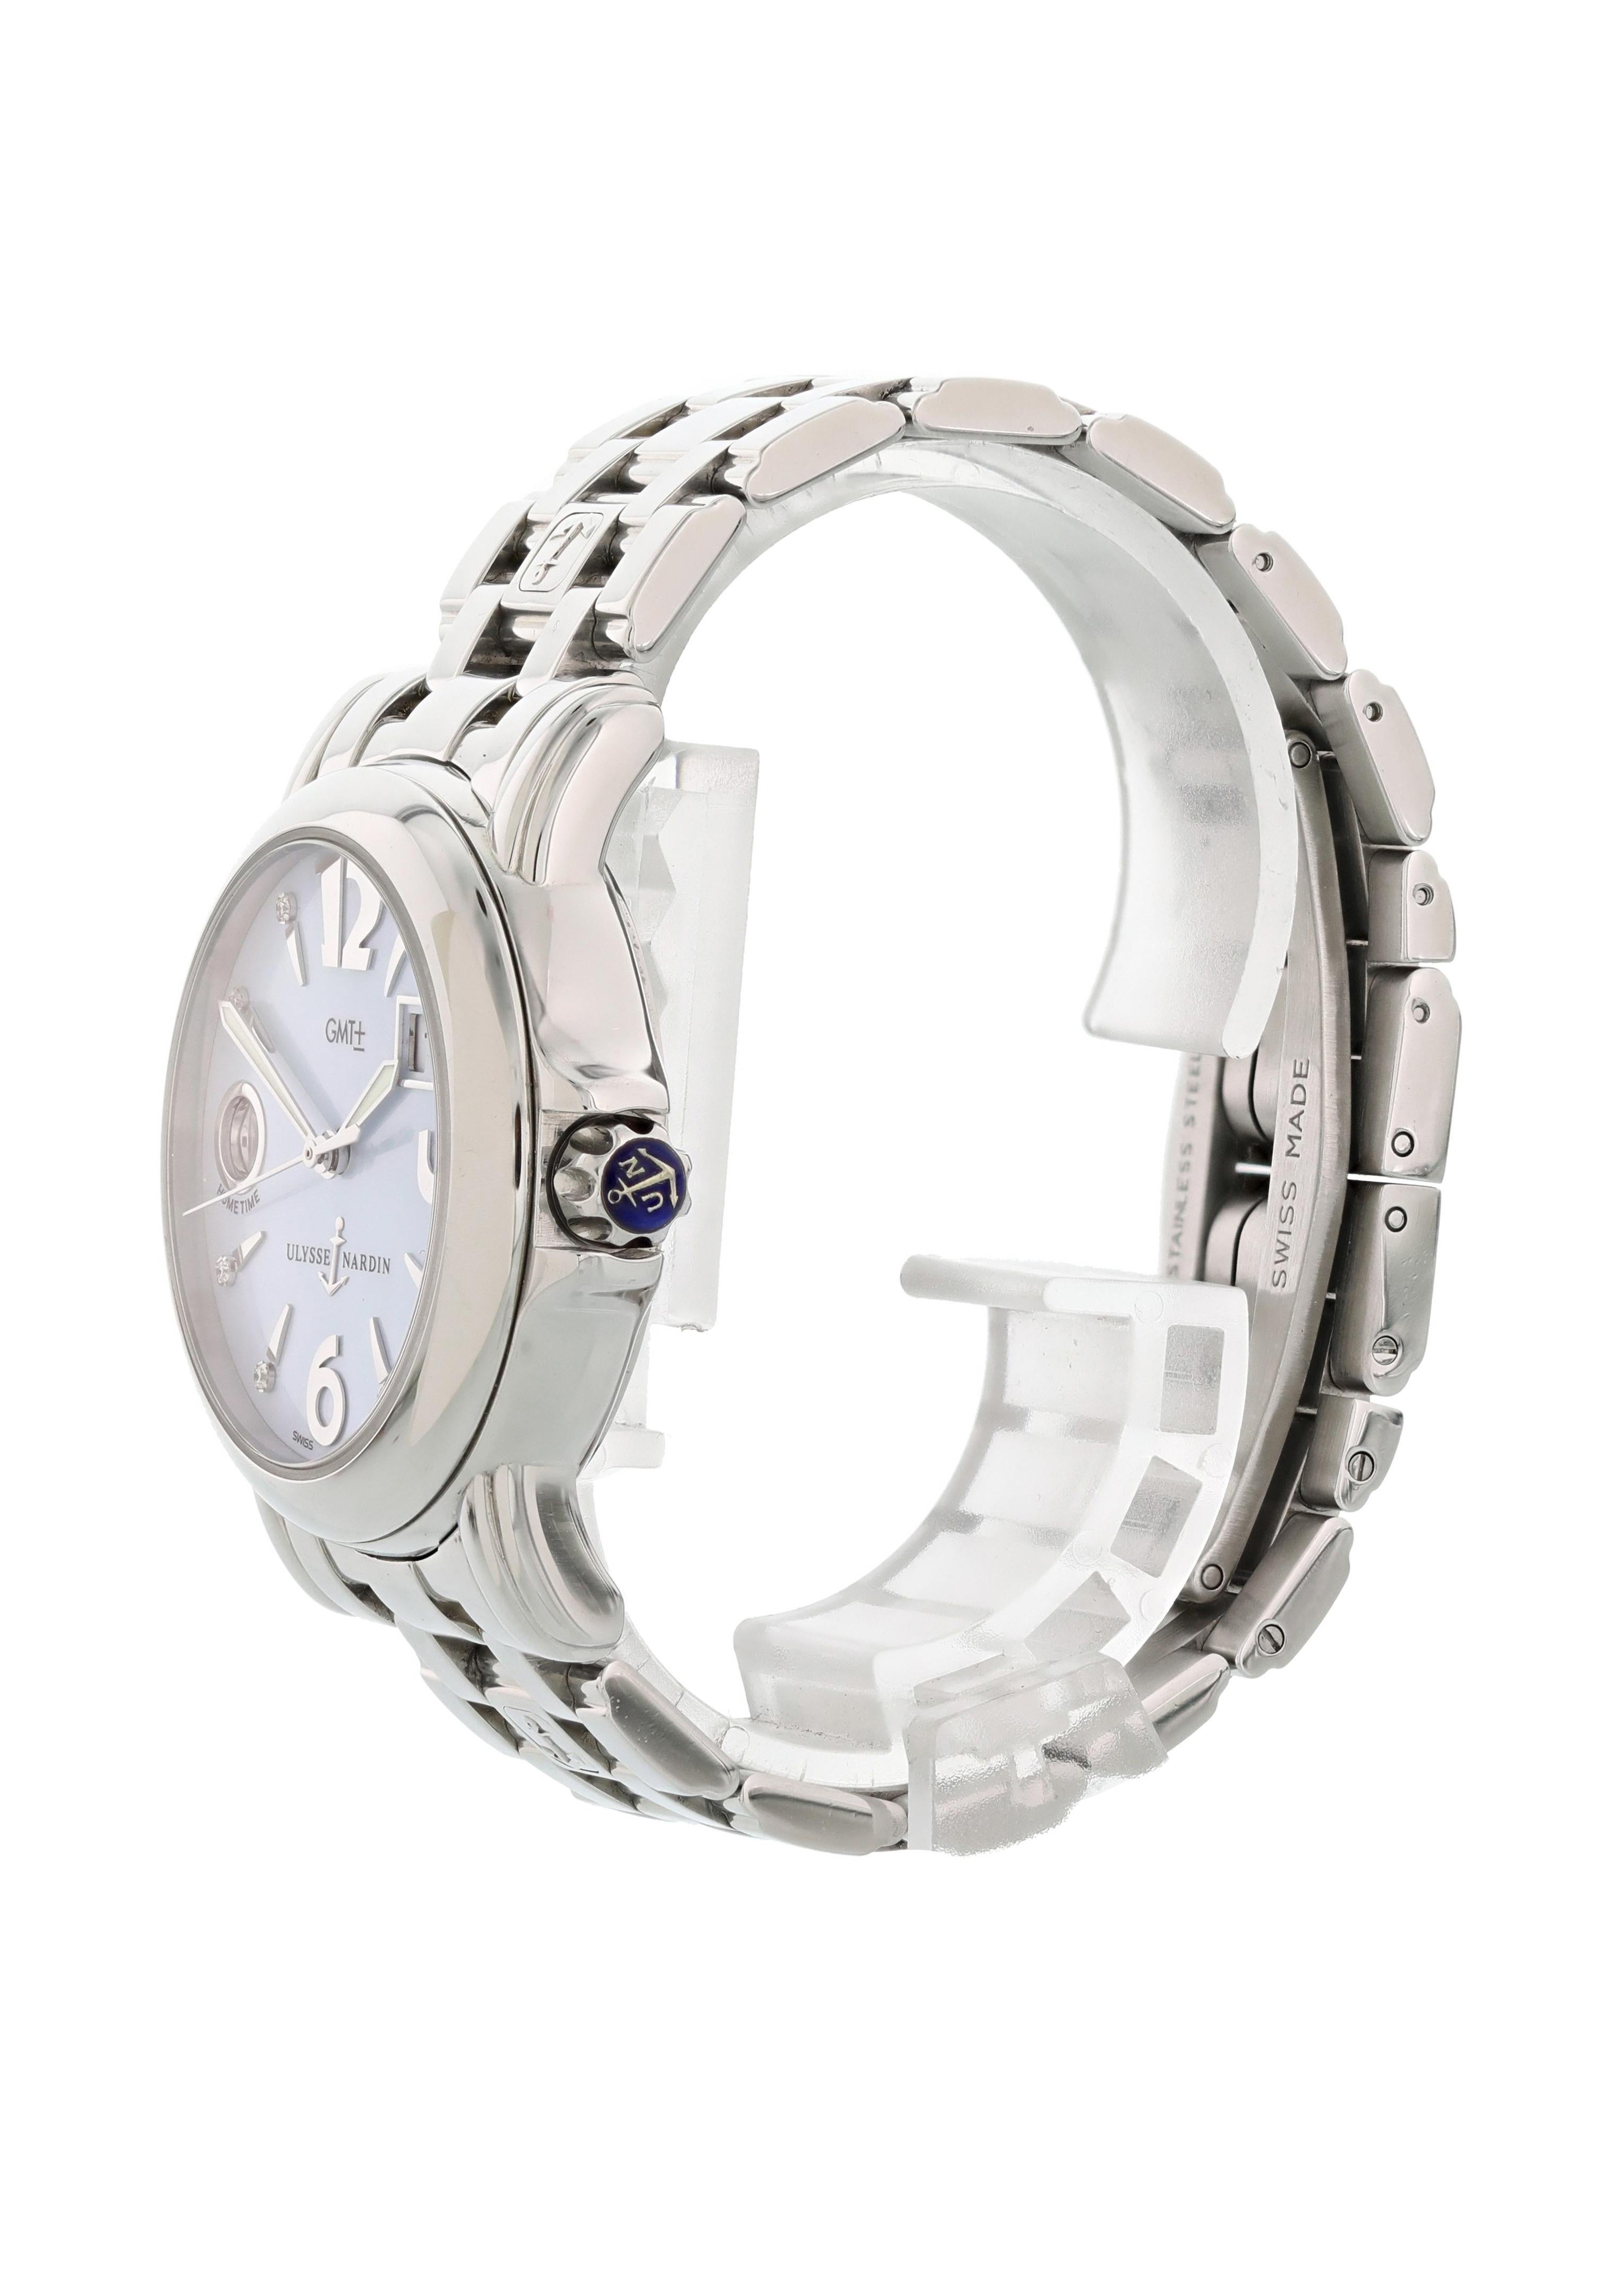 Ulysse Nardin Big Date GMT 223-22 Mother of Pearl Ladies Watch. 37mm stainless steel case with smooth bezel. Blue mother of pearl dial with luminous steel hands steel index hour markers with factory placed diamonds. Arabic numeral hour markers at